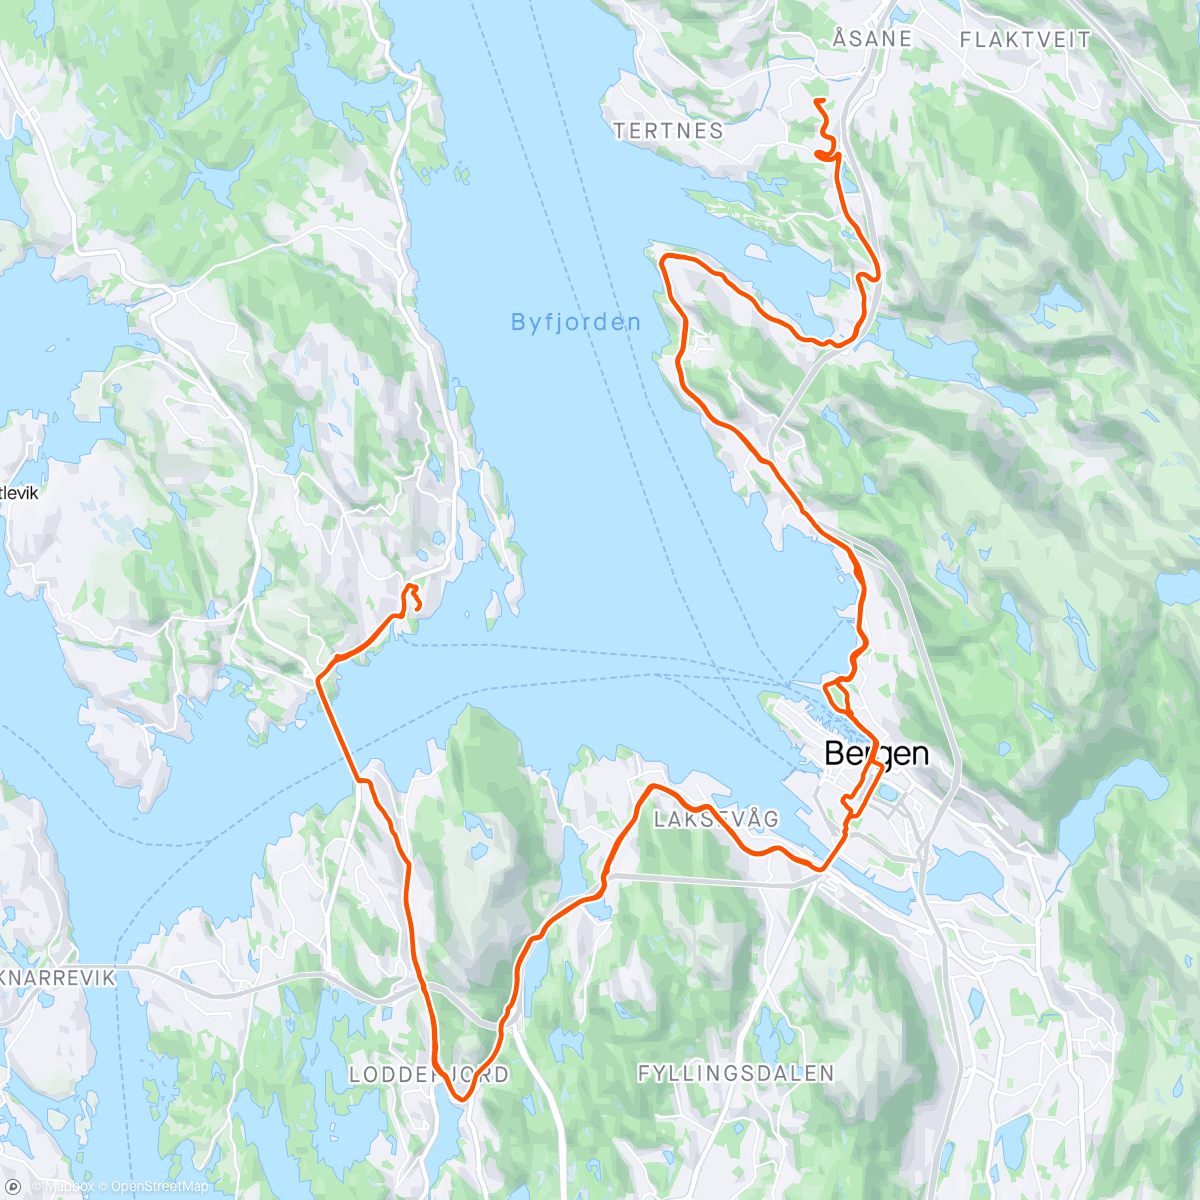 Map of the activity, Åsane elever